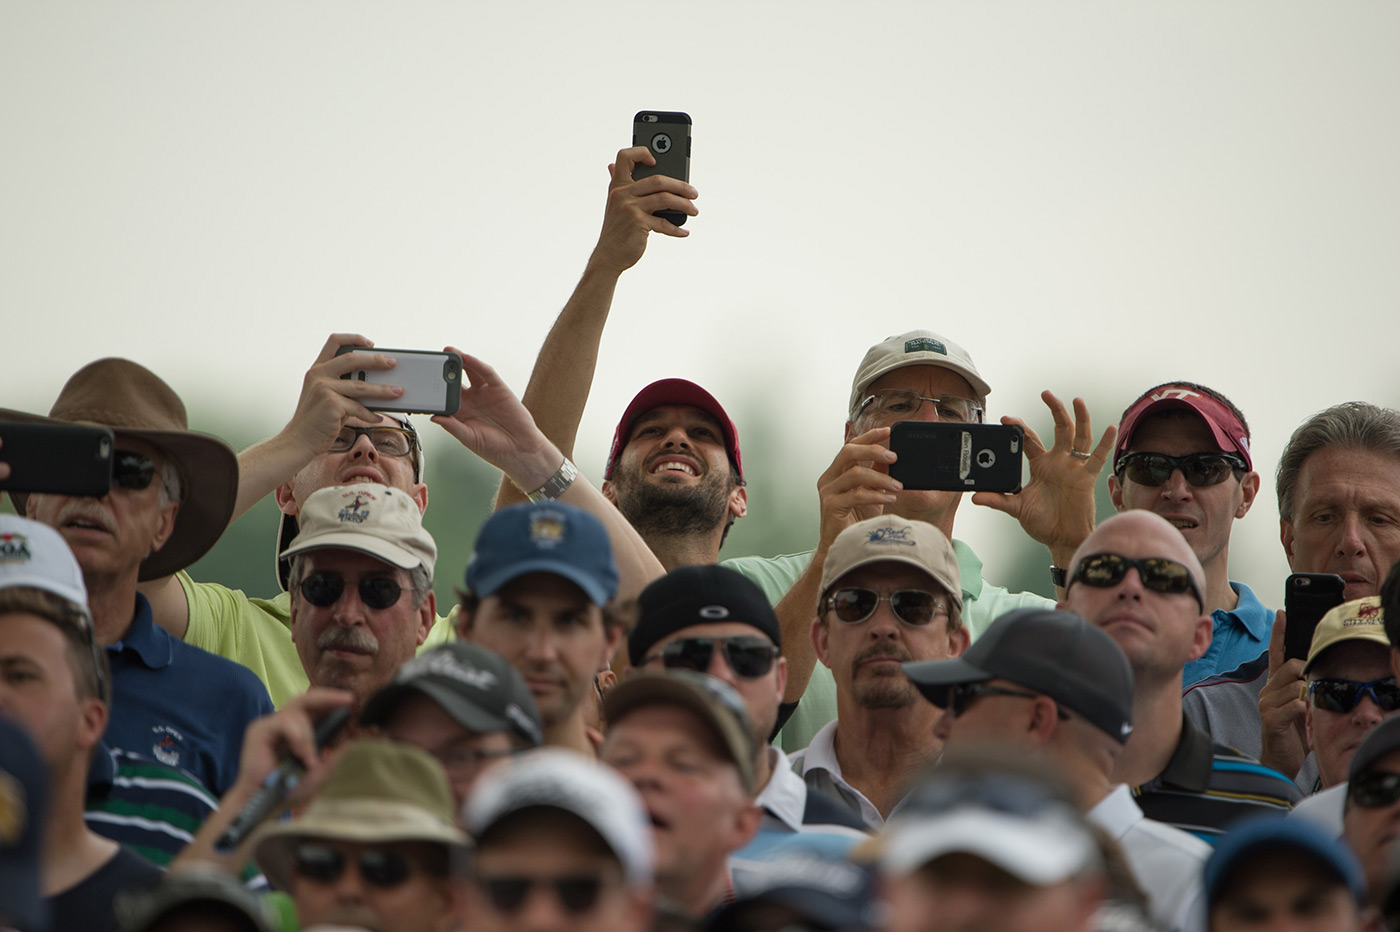 Fans with mobile phones at the 2016 PGA Championship